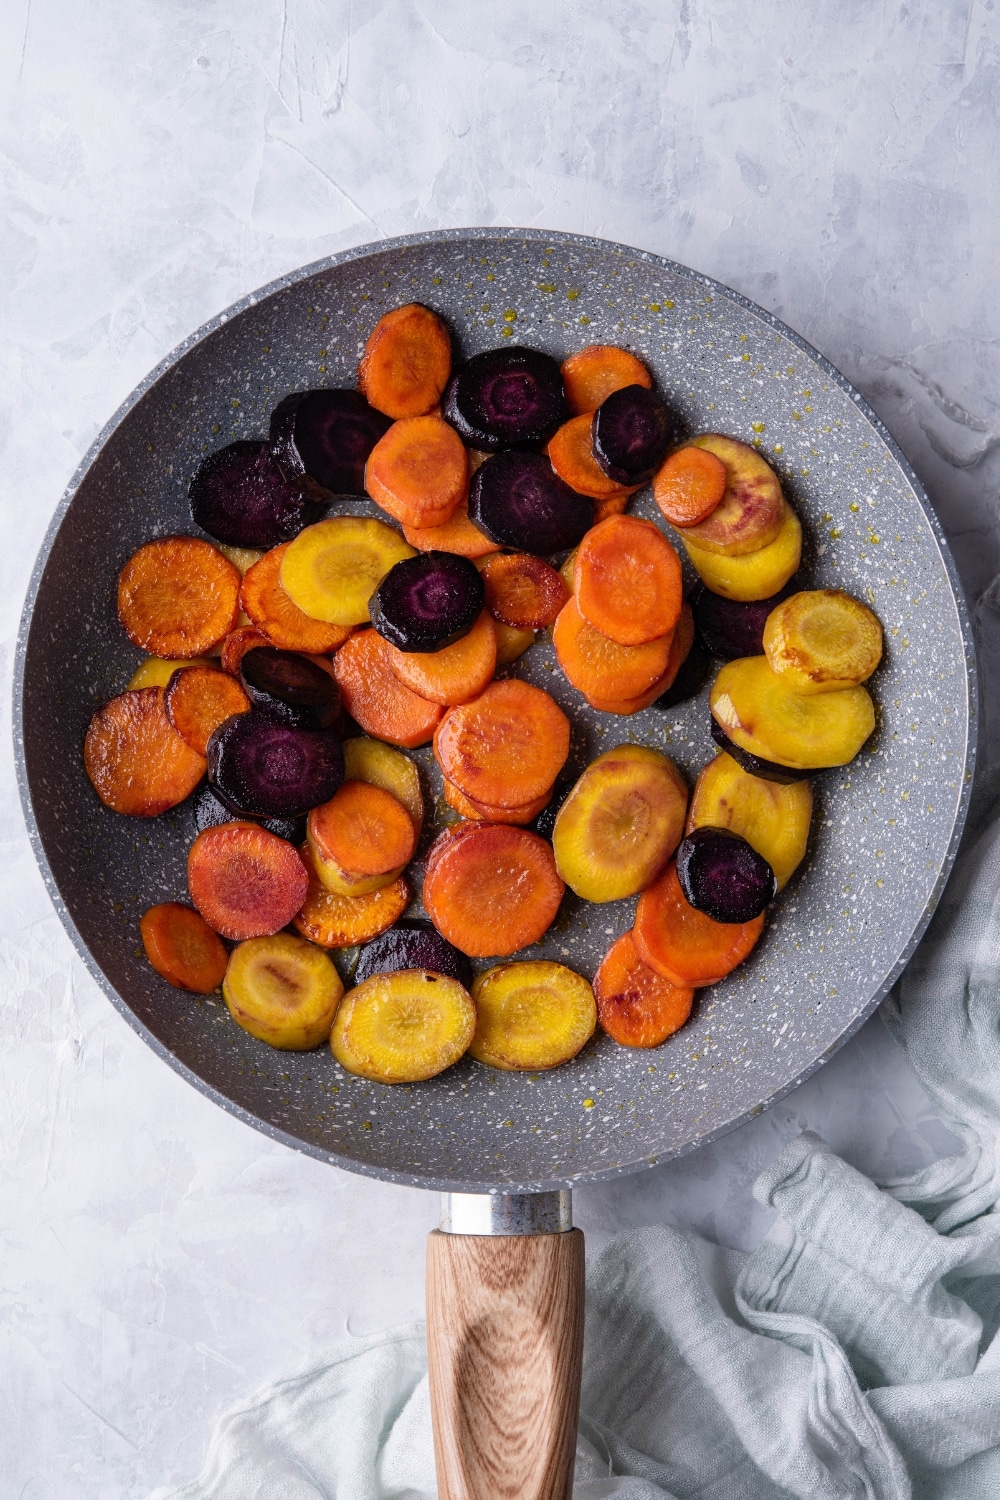 Sauteed slices of violet, yellow, and orange carrots in a grey speckled skillet with a wooden handle. The skillet is on a grey countertop next to a tea towel.